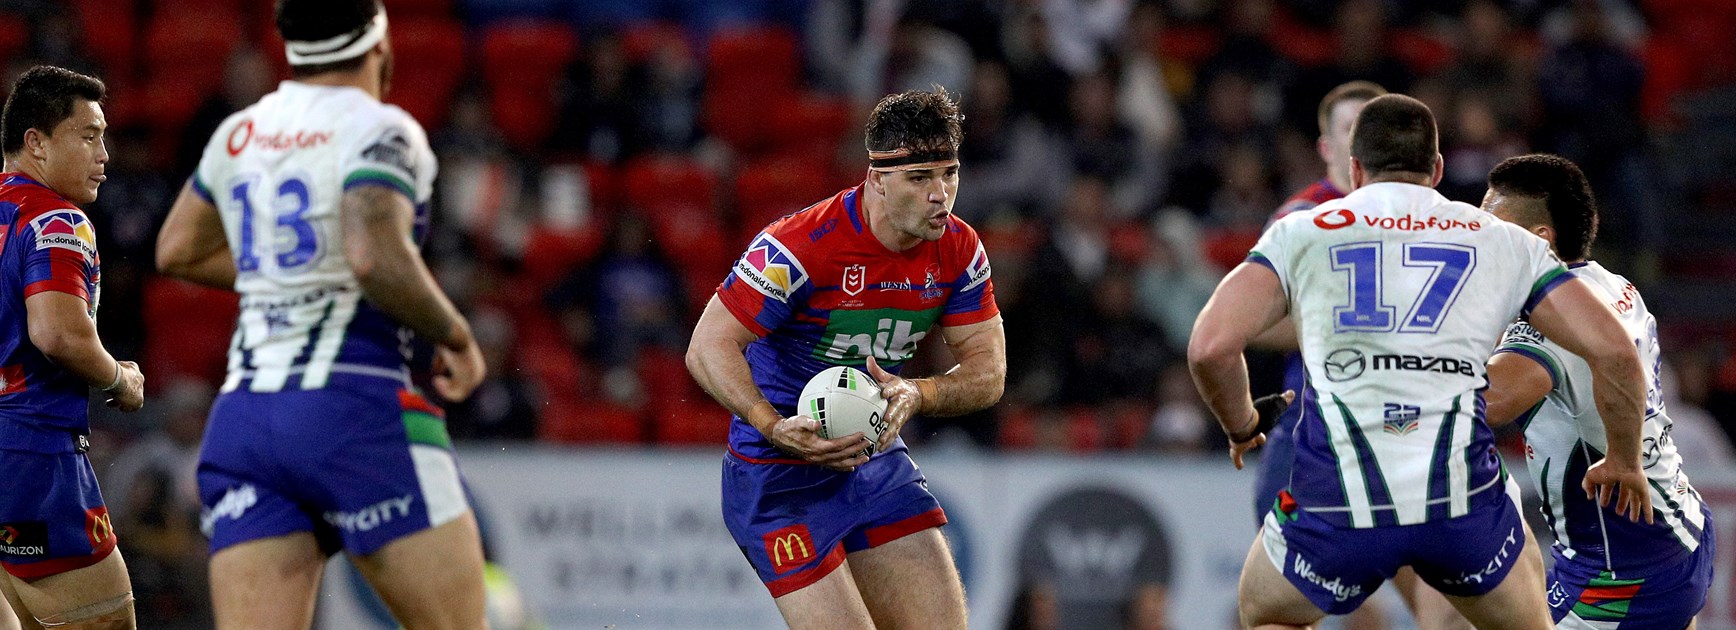 Guerra retires: Knights veteran hanging up boots at season's end